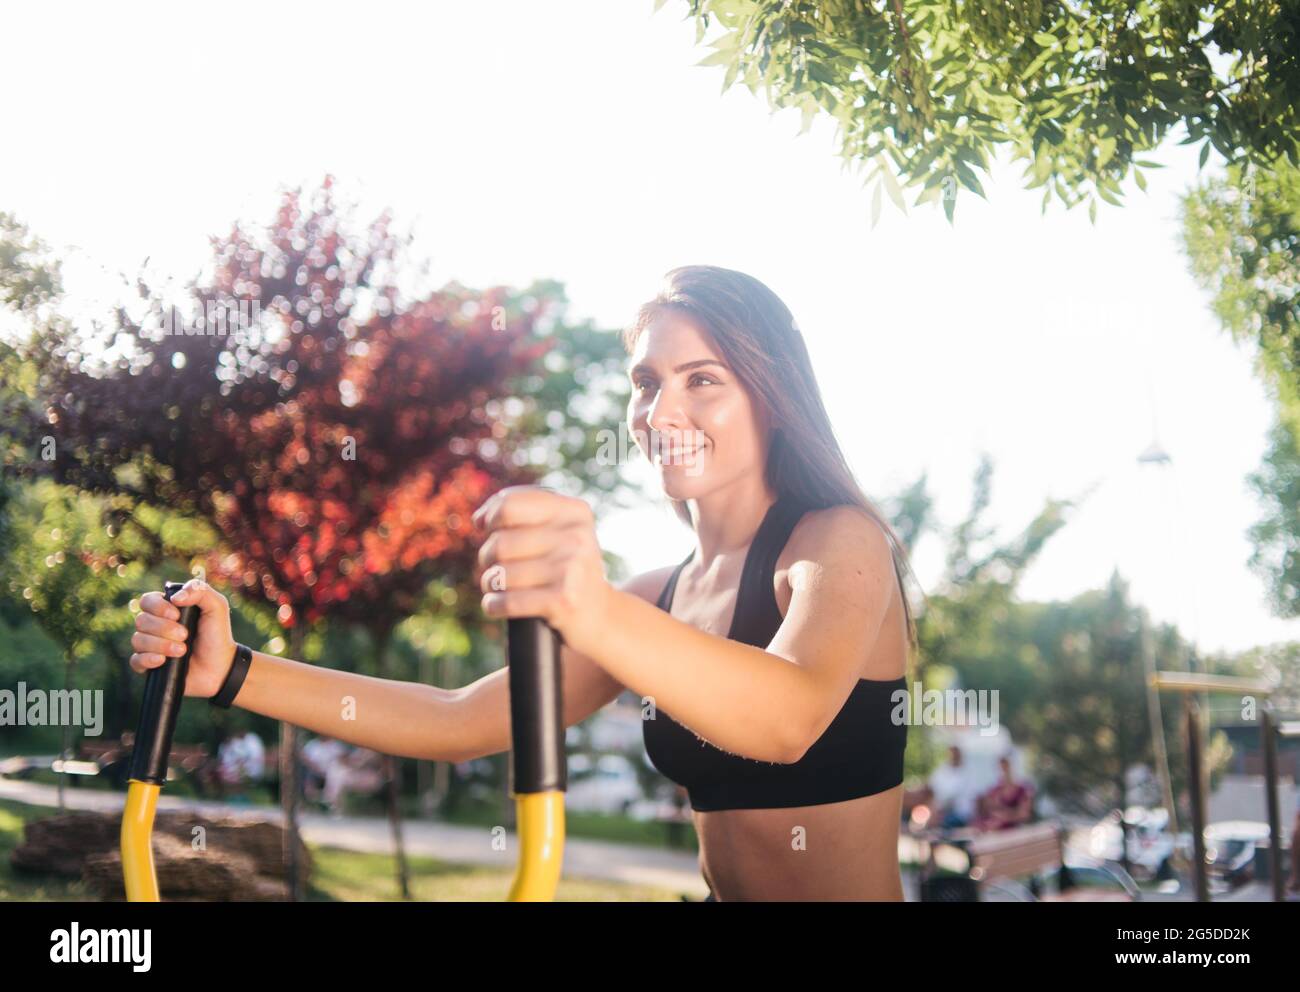 Healthy fit woman in sport clothes doing exercise on outdoors exercise machine Stock Photo